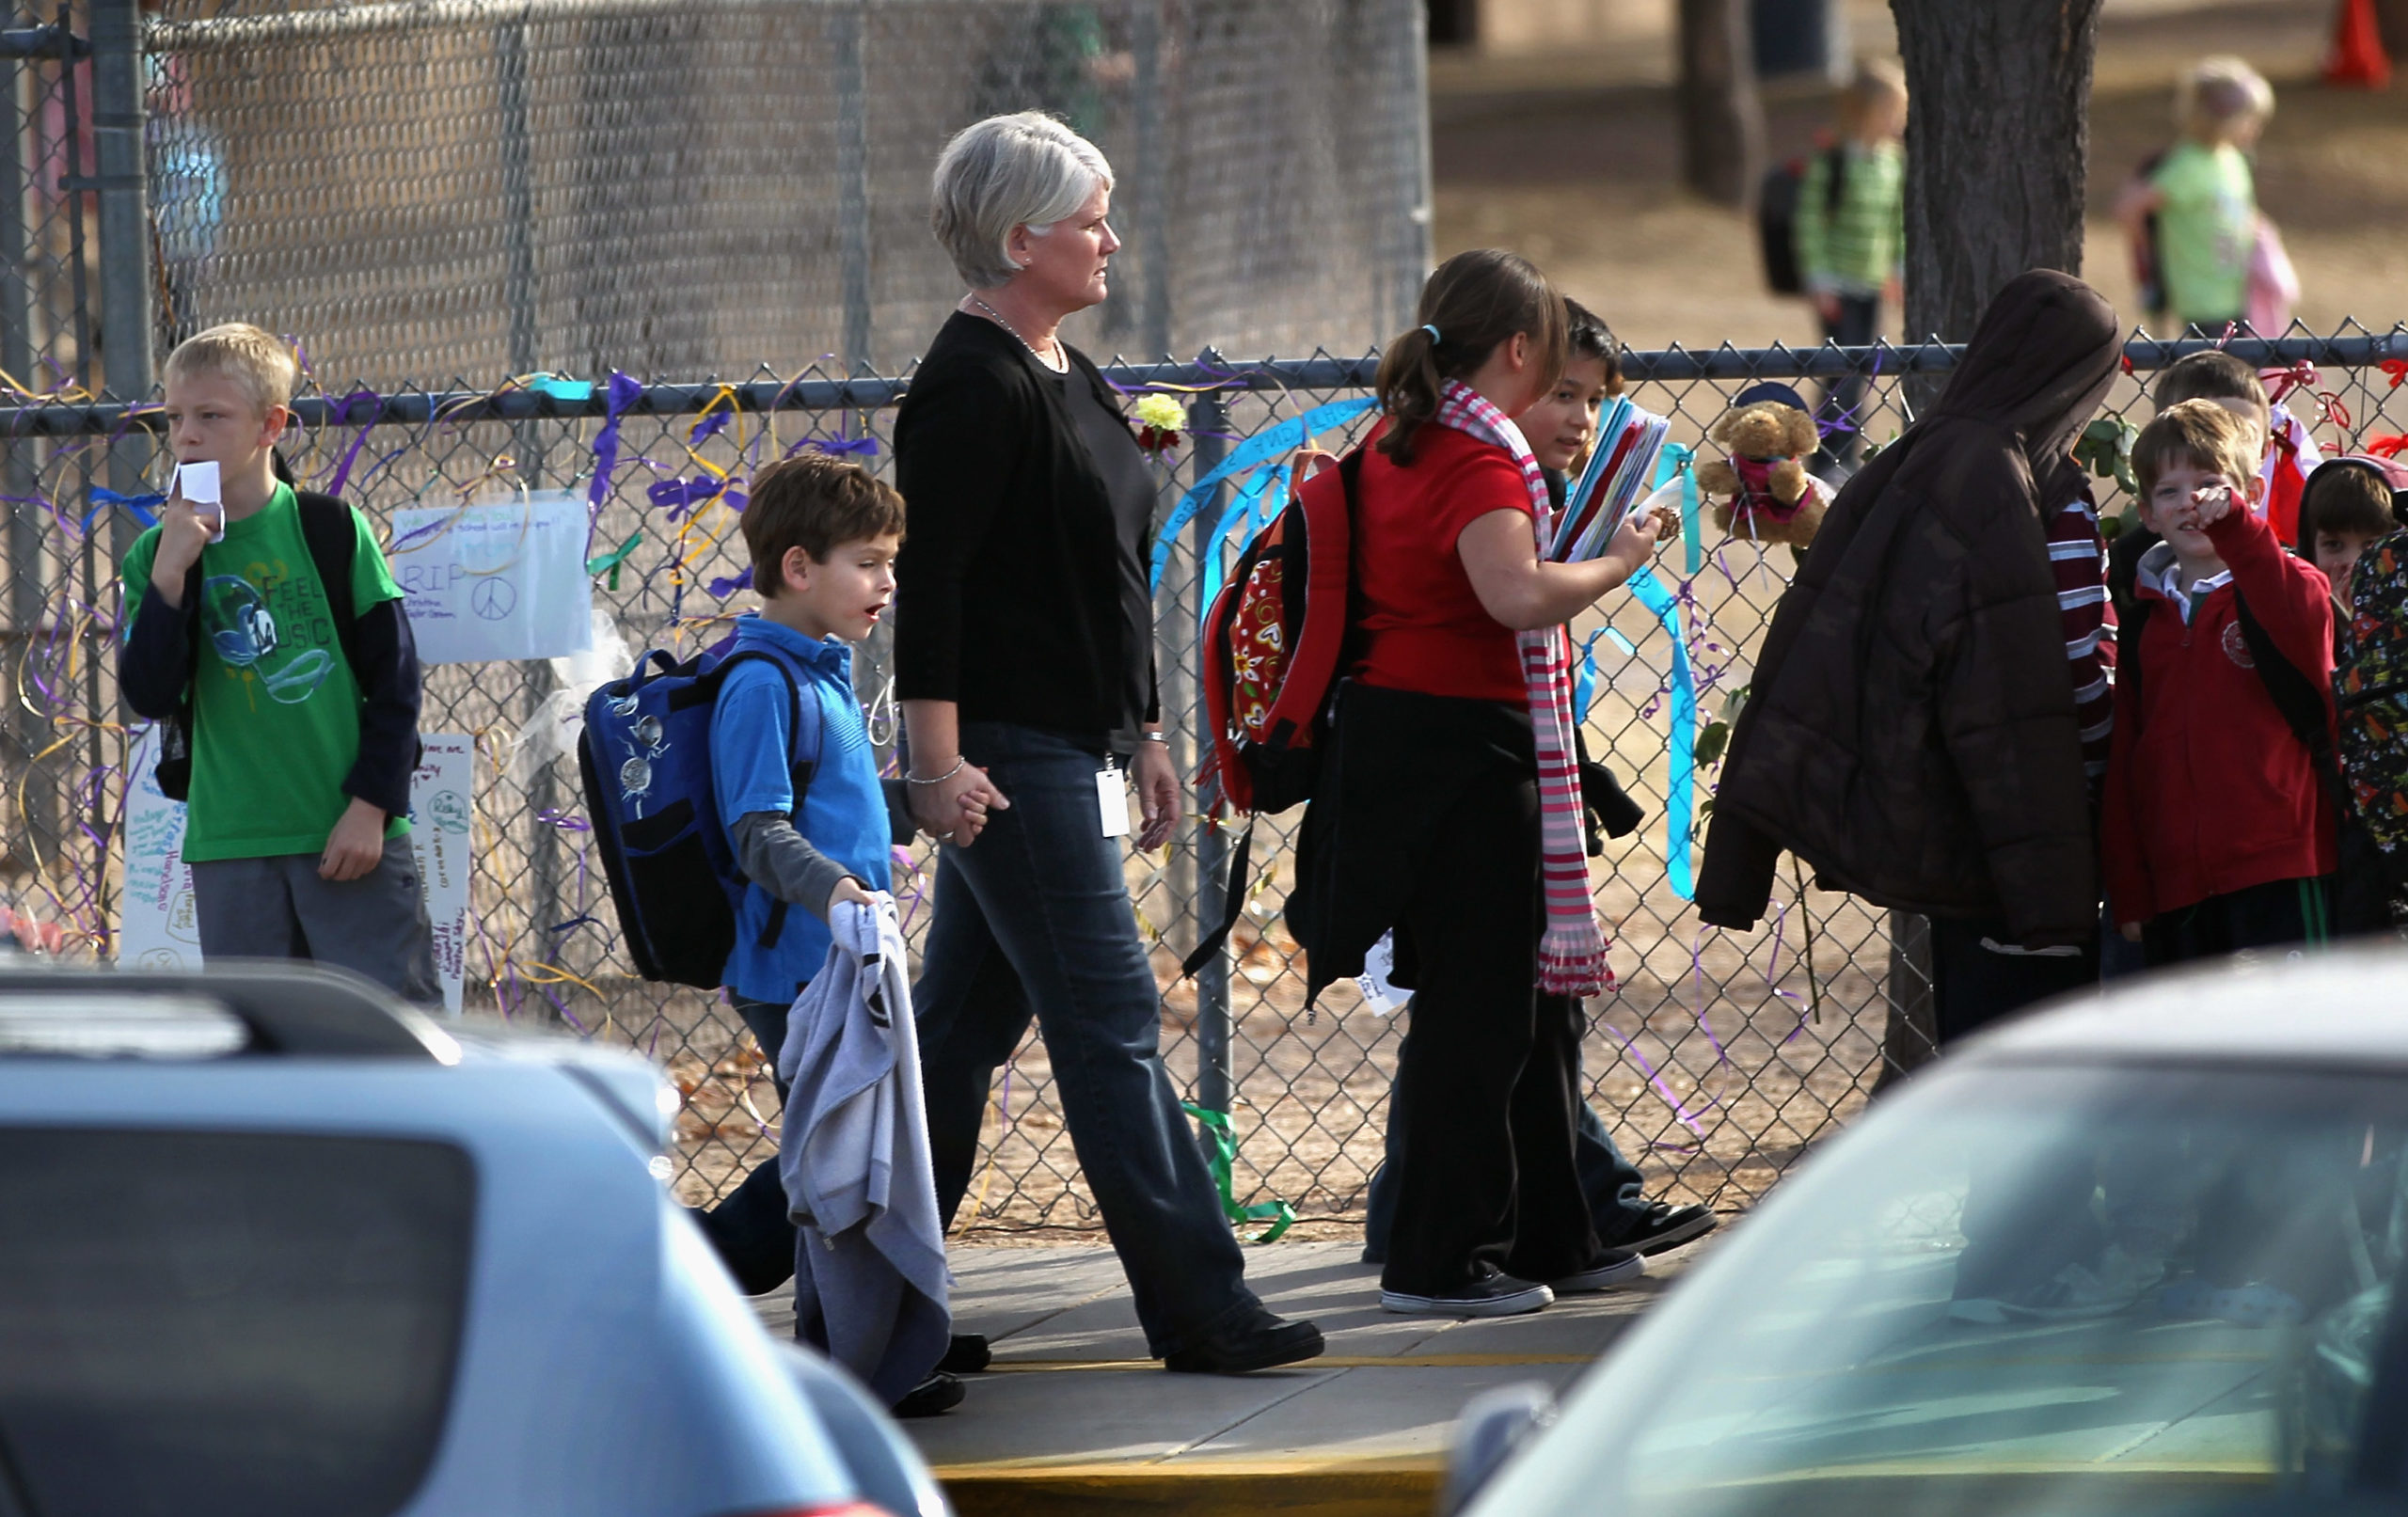 Students are picked up from the Mesa Verde Elementary School after their first day back following the slaying of schoolmate Christina Green, 9, on January 10, 2011 in Tuscon, Arizona. Christina was killed along with five others when a gunmen opened fire on U.S. Rep. Gabrielle Giffords (D-AZ), wounding her and more than a dozen others Friday. Giffords was holding a public event entitled Congress on your Corner outside a Safeway grocery store in Tuscon when a gunmen began a shooting rampage. (Photo by John Moore/Getty Images)